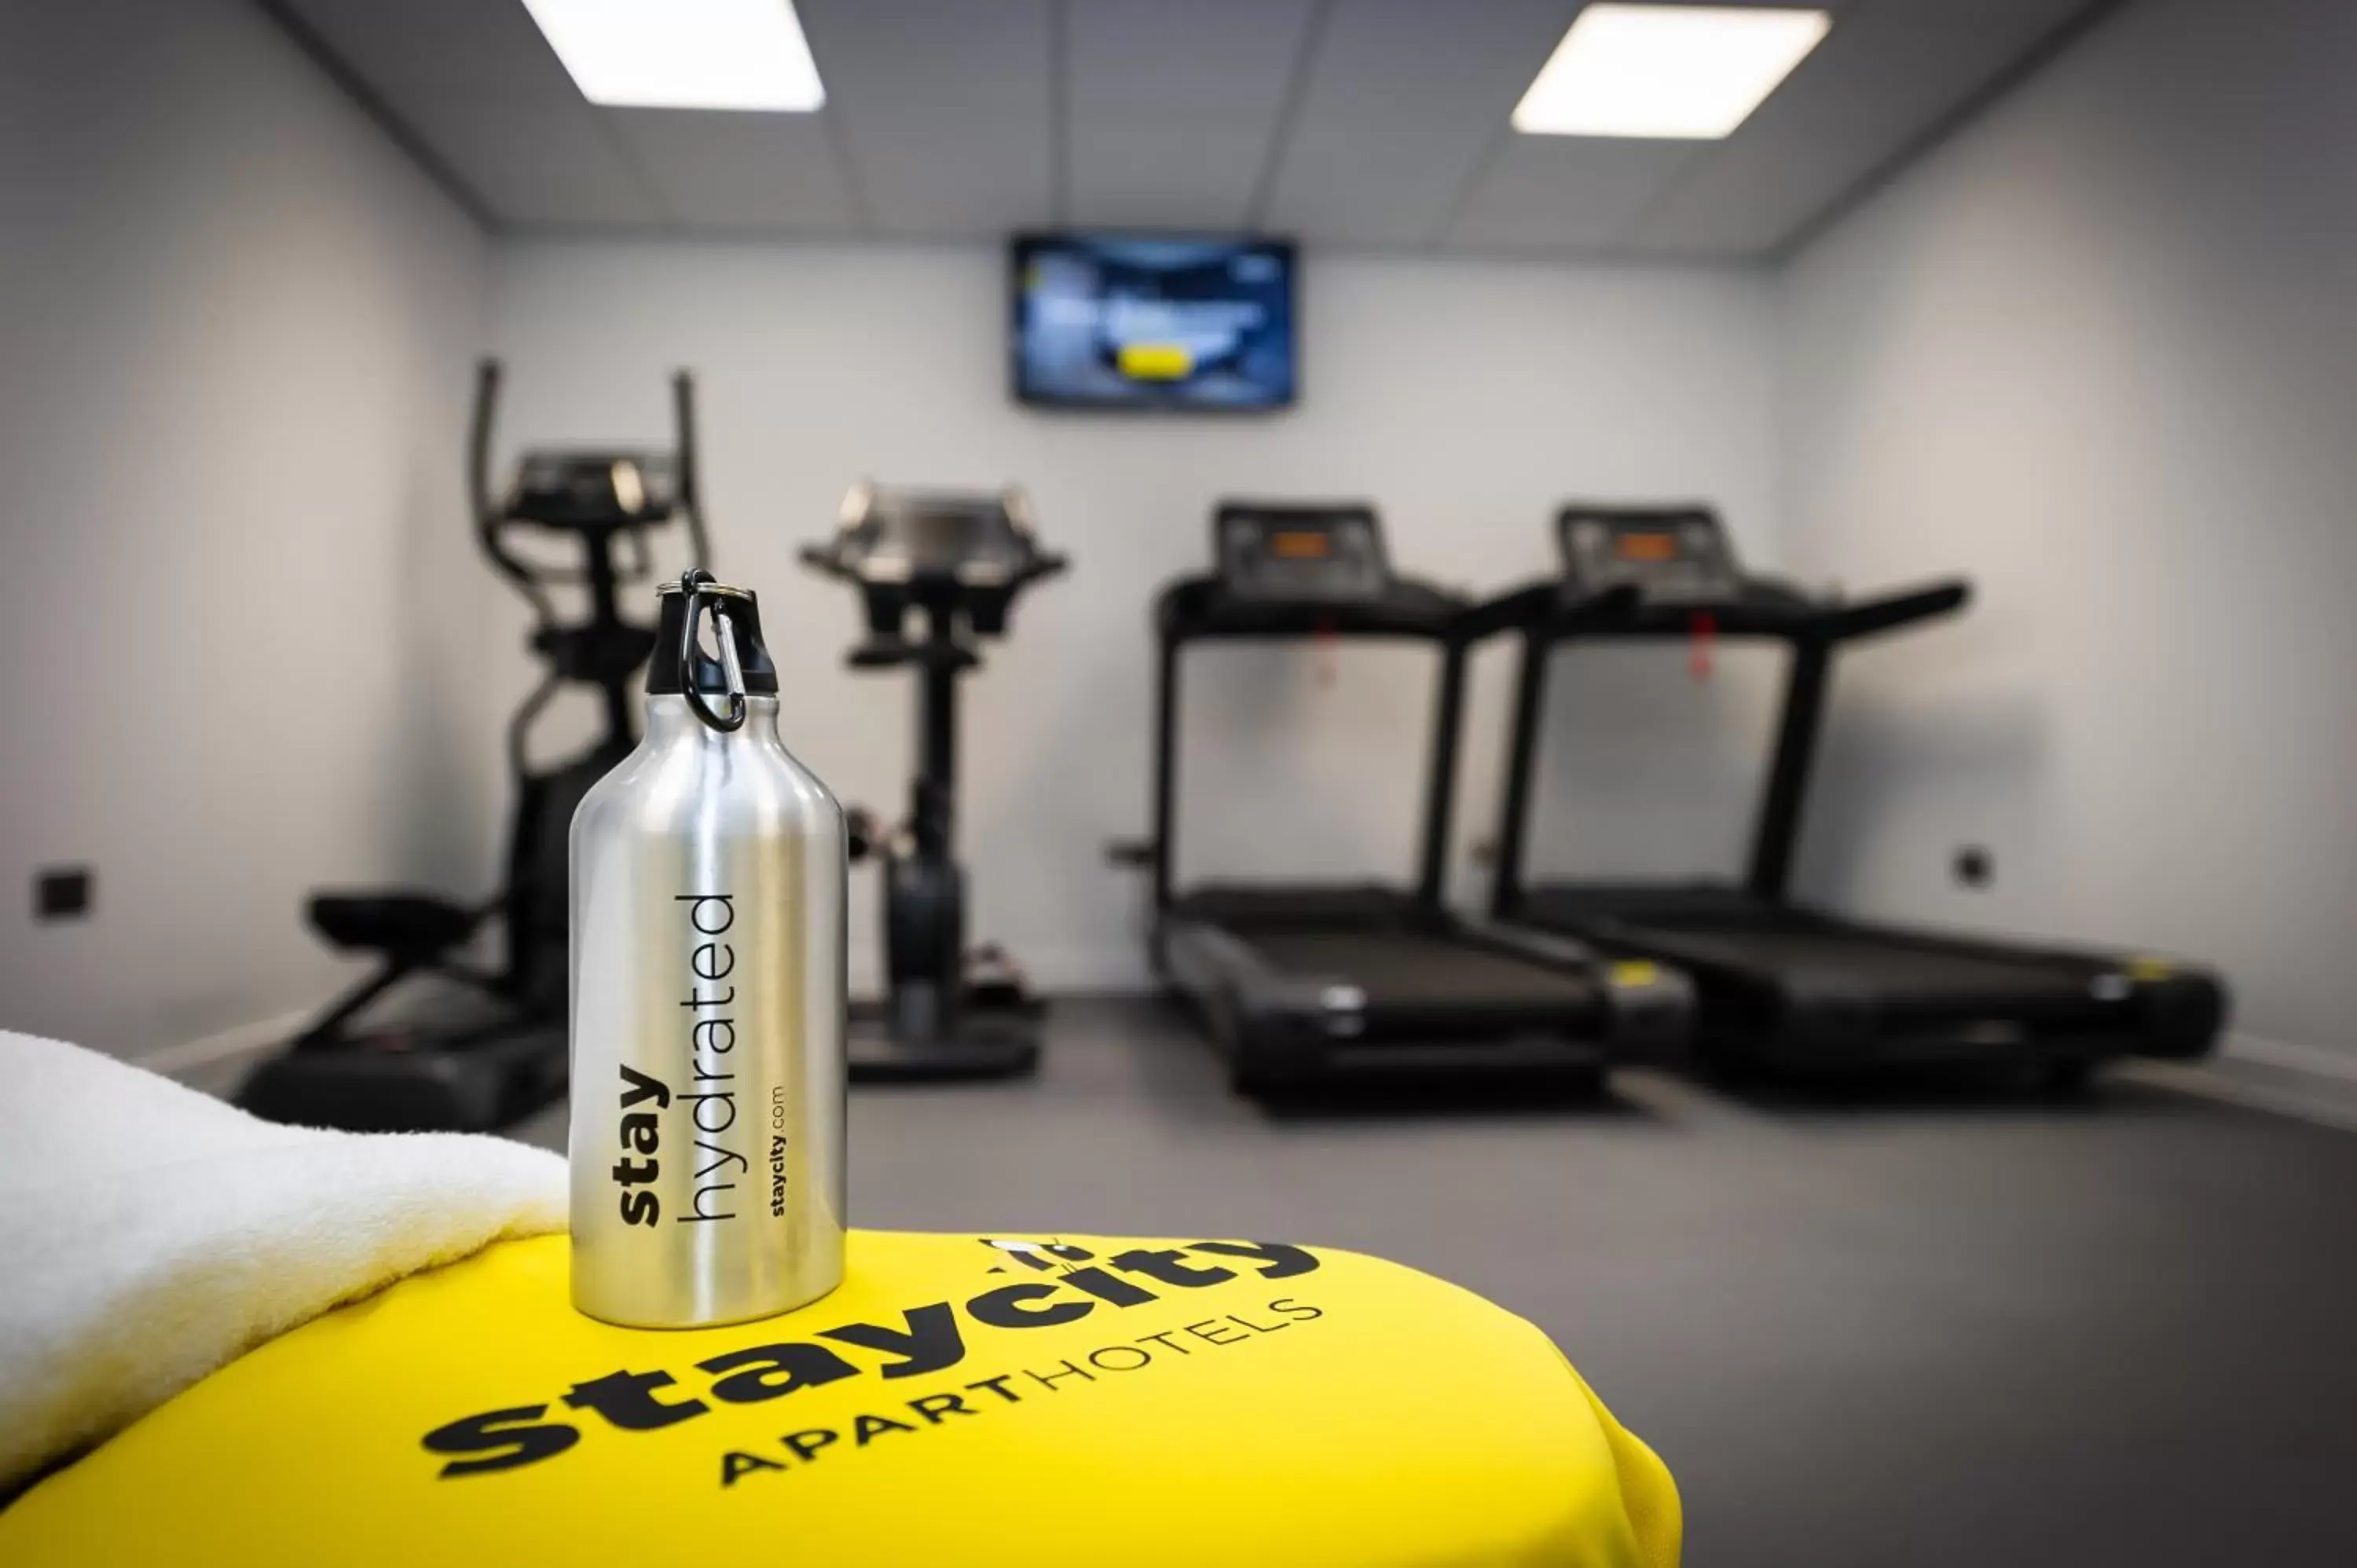 Fitness centre/facilities, Fitness Center/Facilities in Staycity Aparthotels Liverpool Waterfront